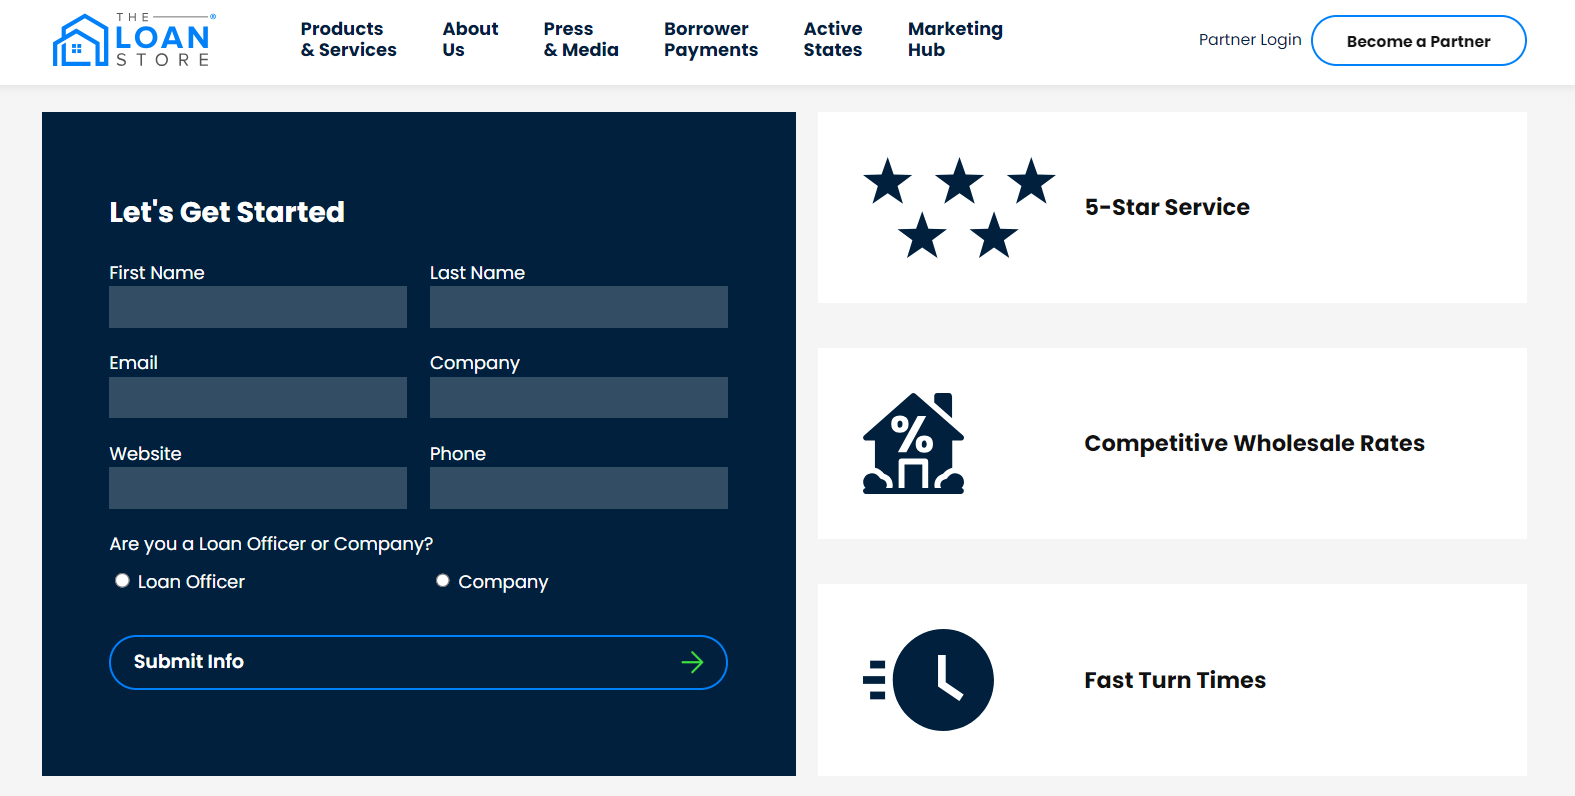  a screenshot of The Loan Store’s website, showing the sign-up portal for mortgage brokers who want to partner with them